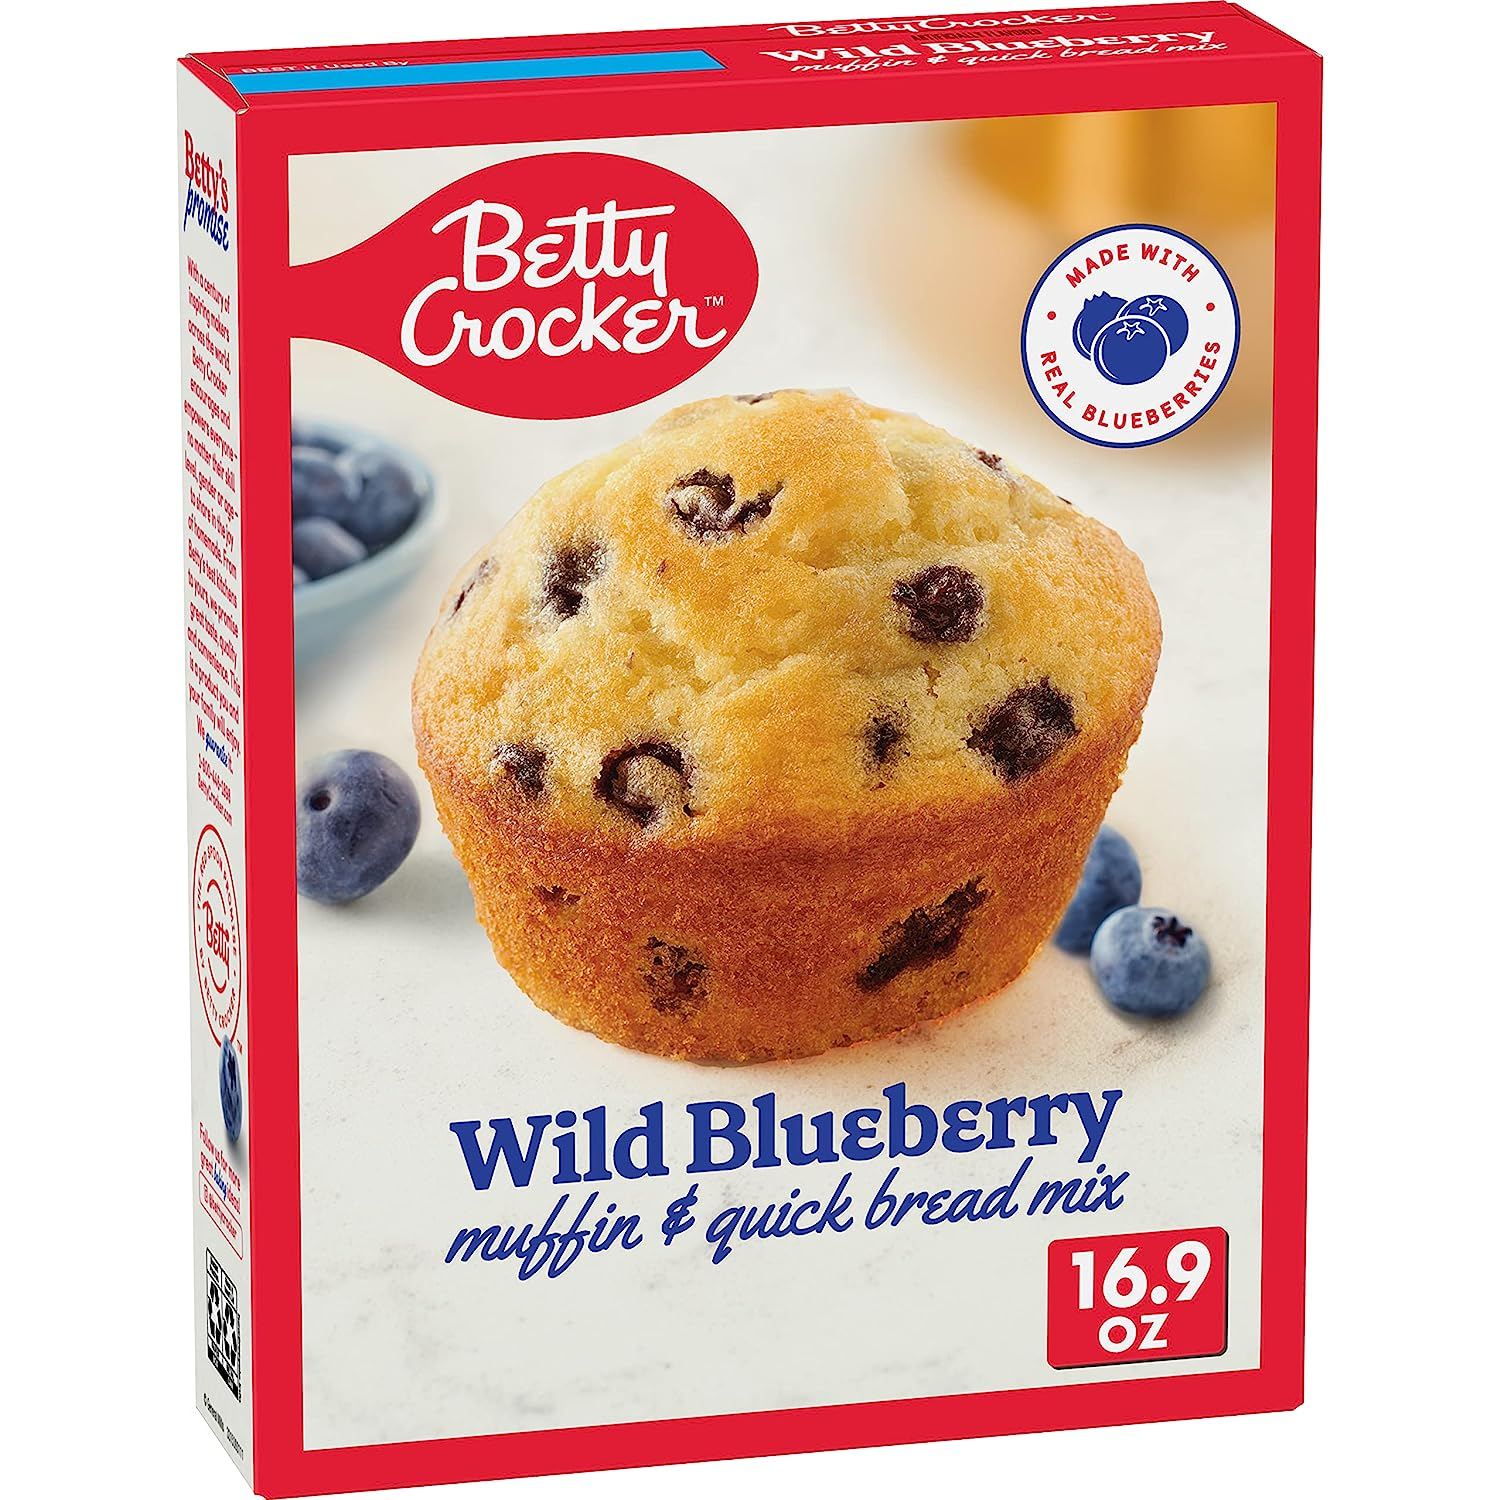 Betty Crocker Wild Blueberry Muffin and Quick Bread Mix, 16.9 oz. $1.87 w/5 S&S Items $1.99 S&S